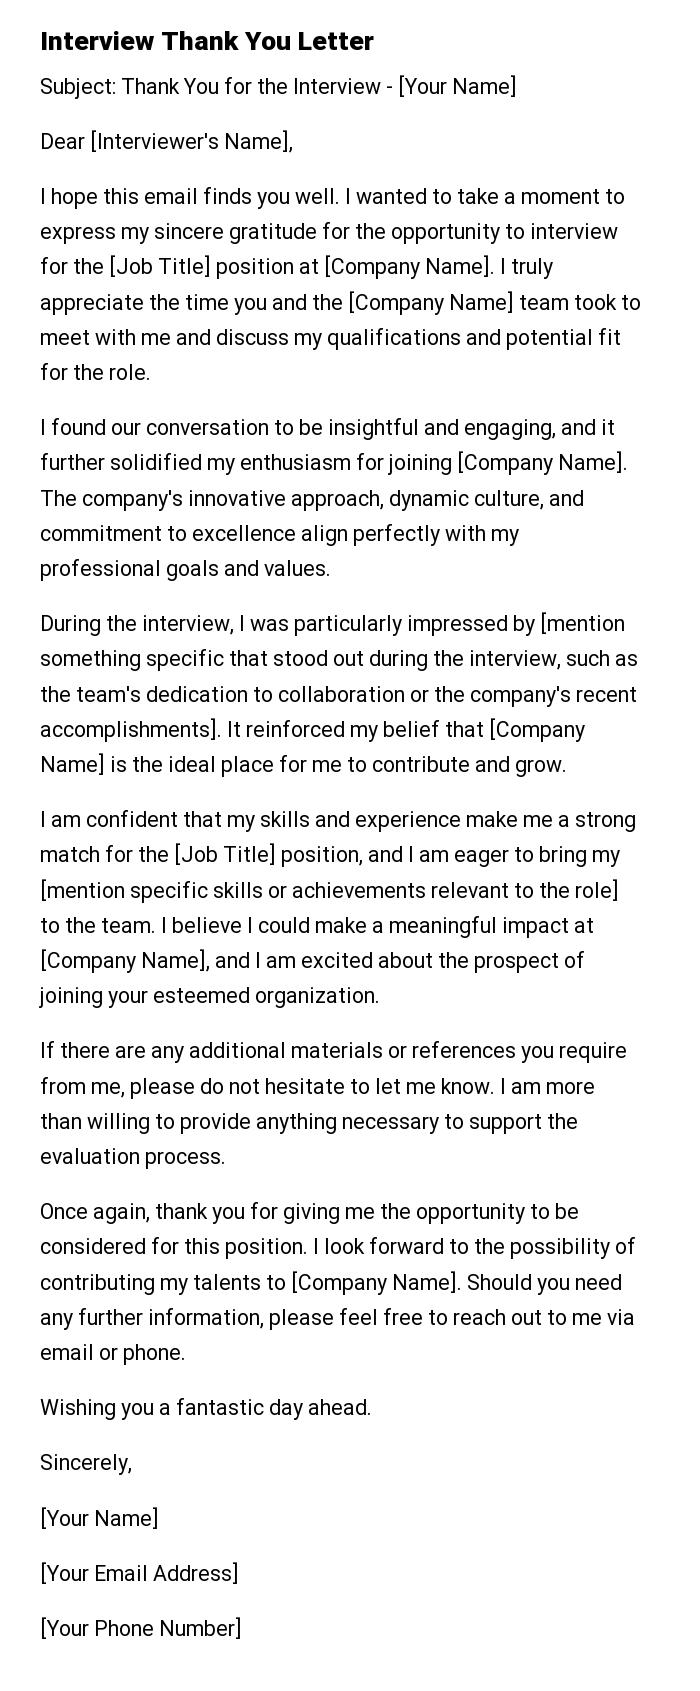 Interview Thank You Letter